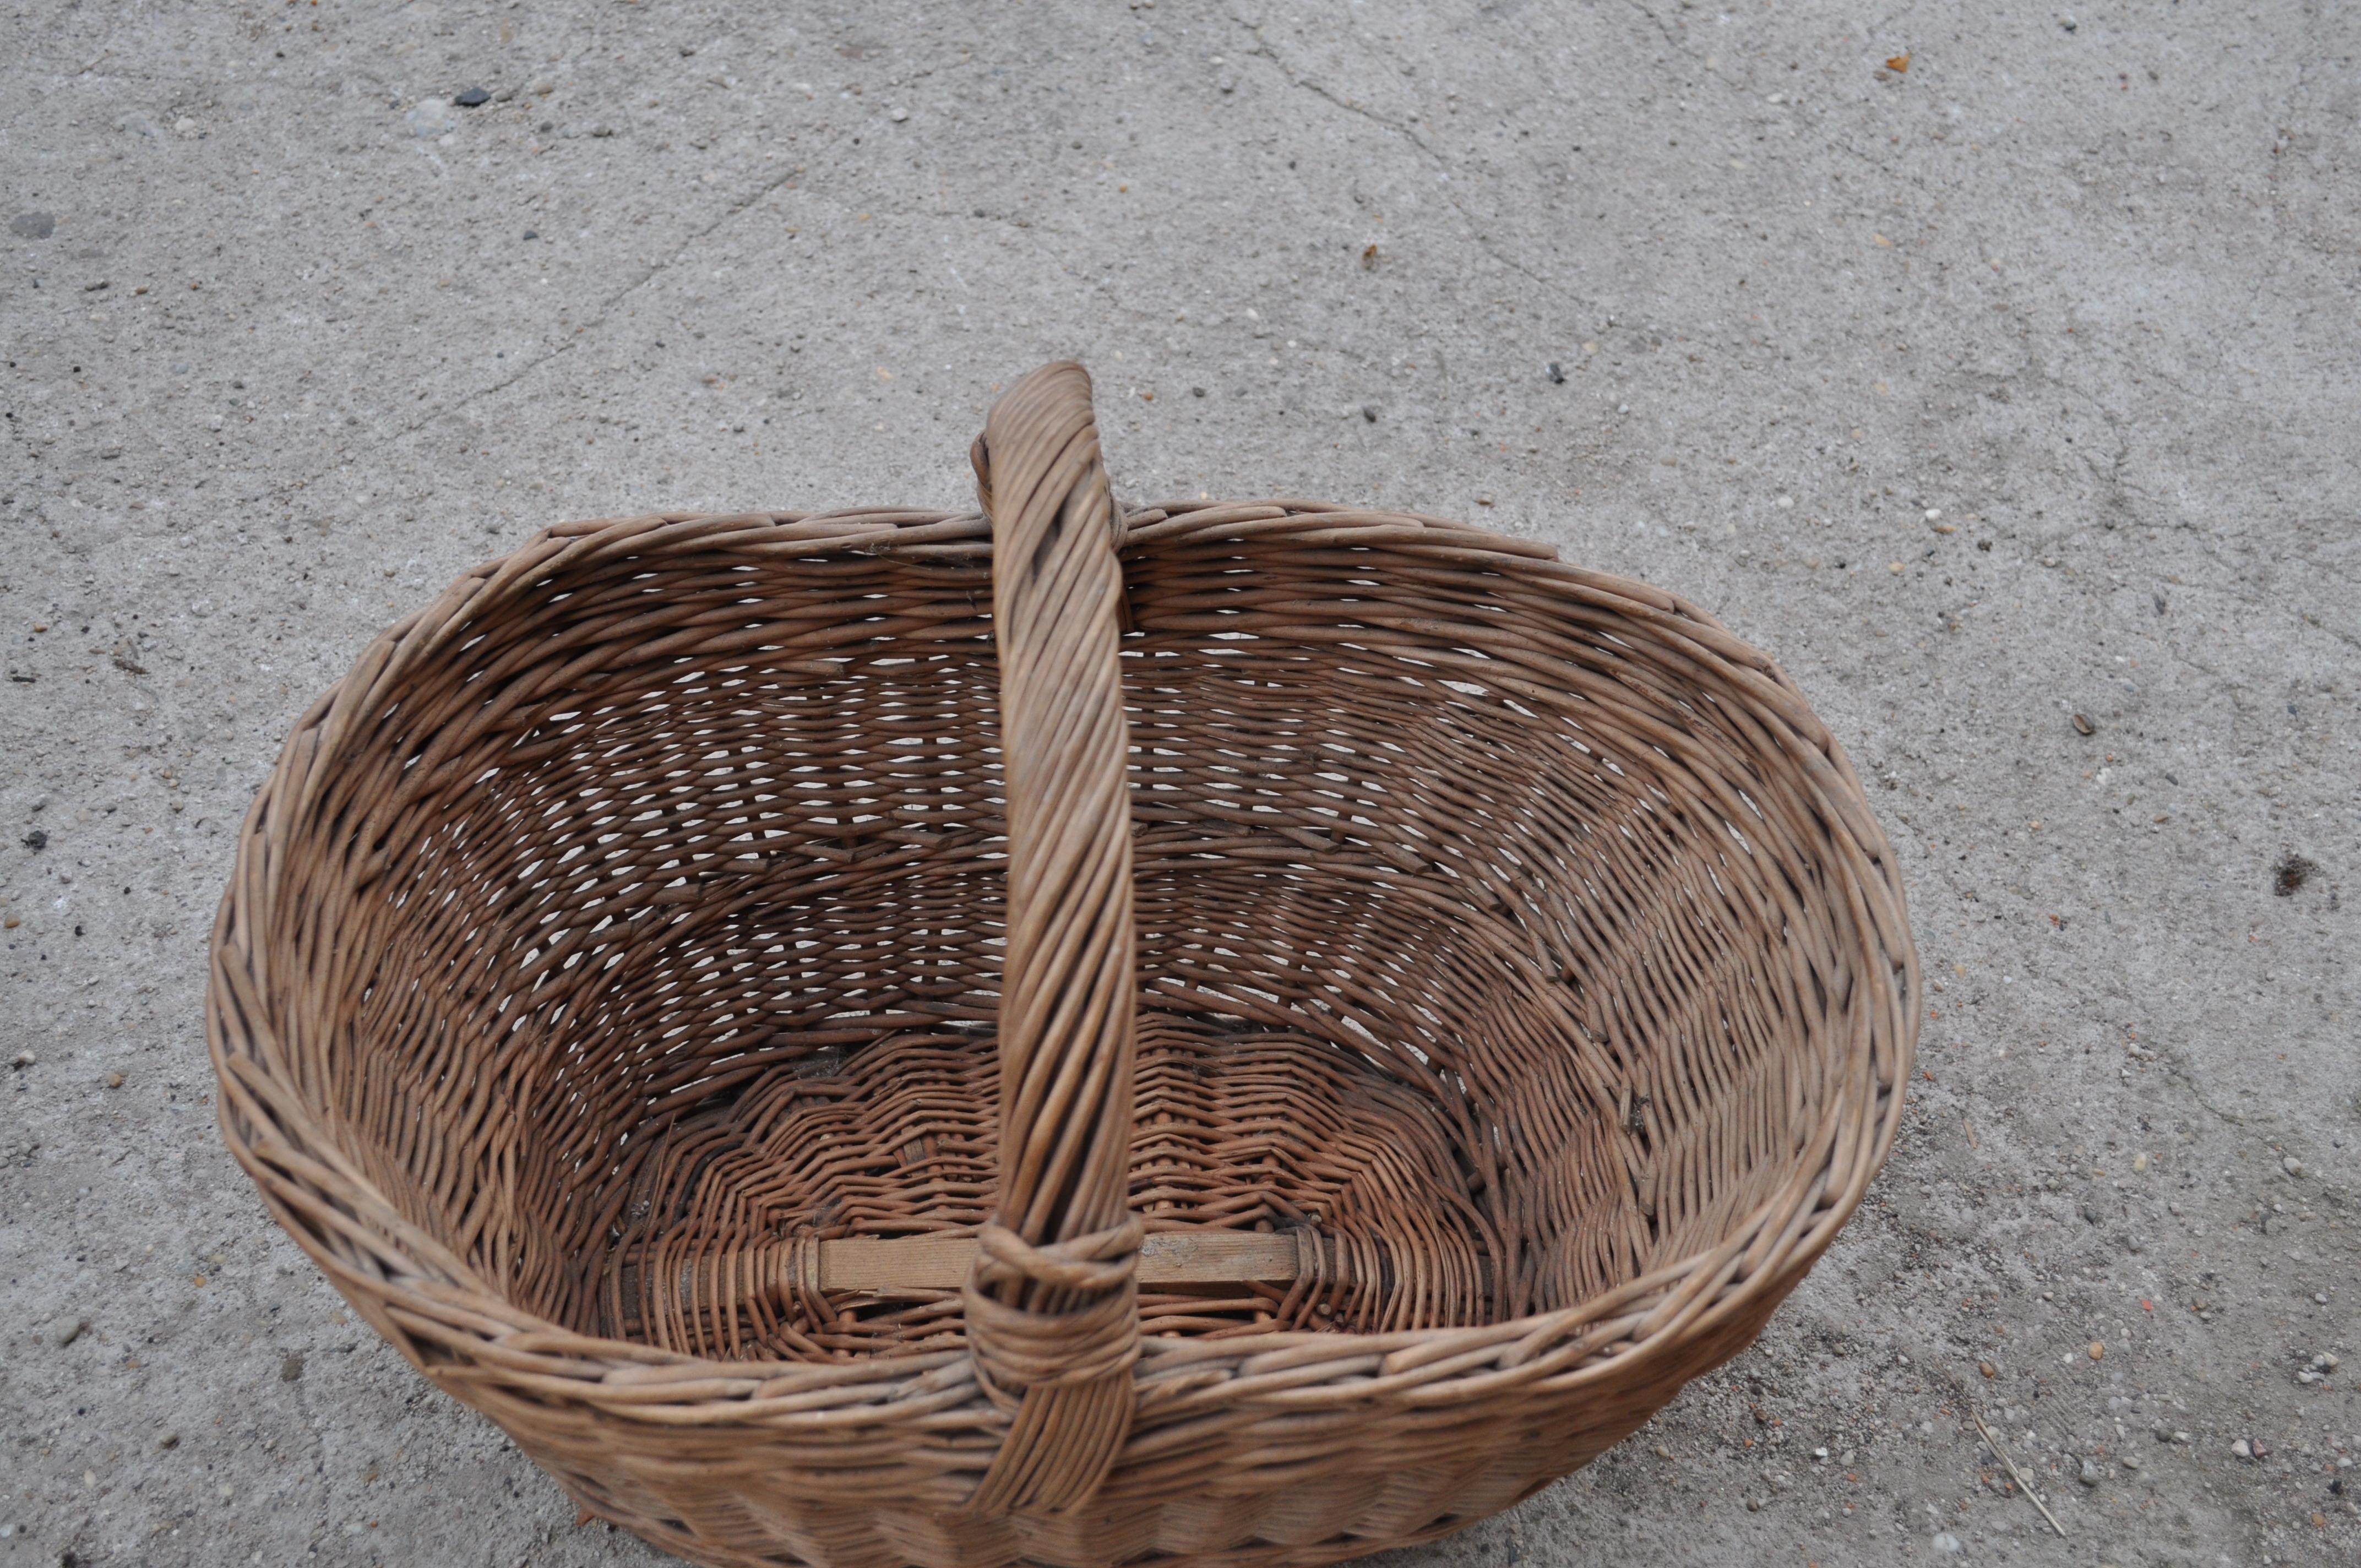 Beautiful old handwoven wicker basket. In good vintage condition. We found this in Hungary off a charming cobblestone village.
Measures: Length (Depth)18.5 in
Width 18.5 in
Height 13.78 in.